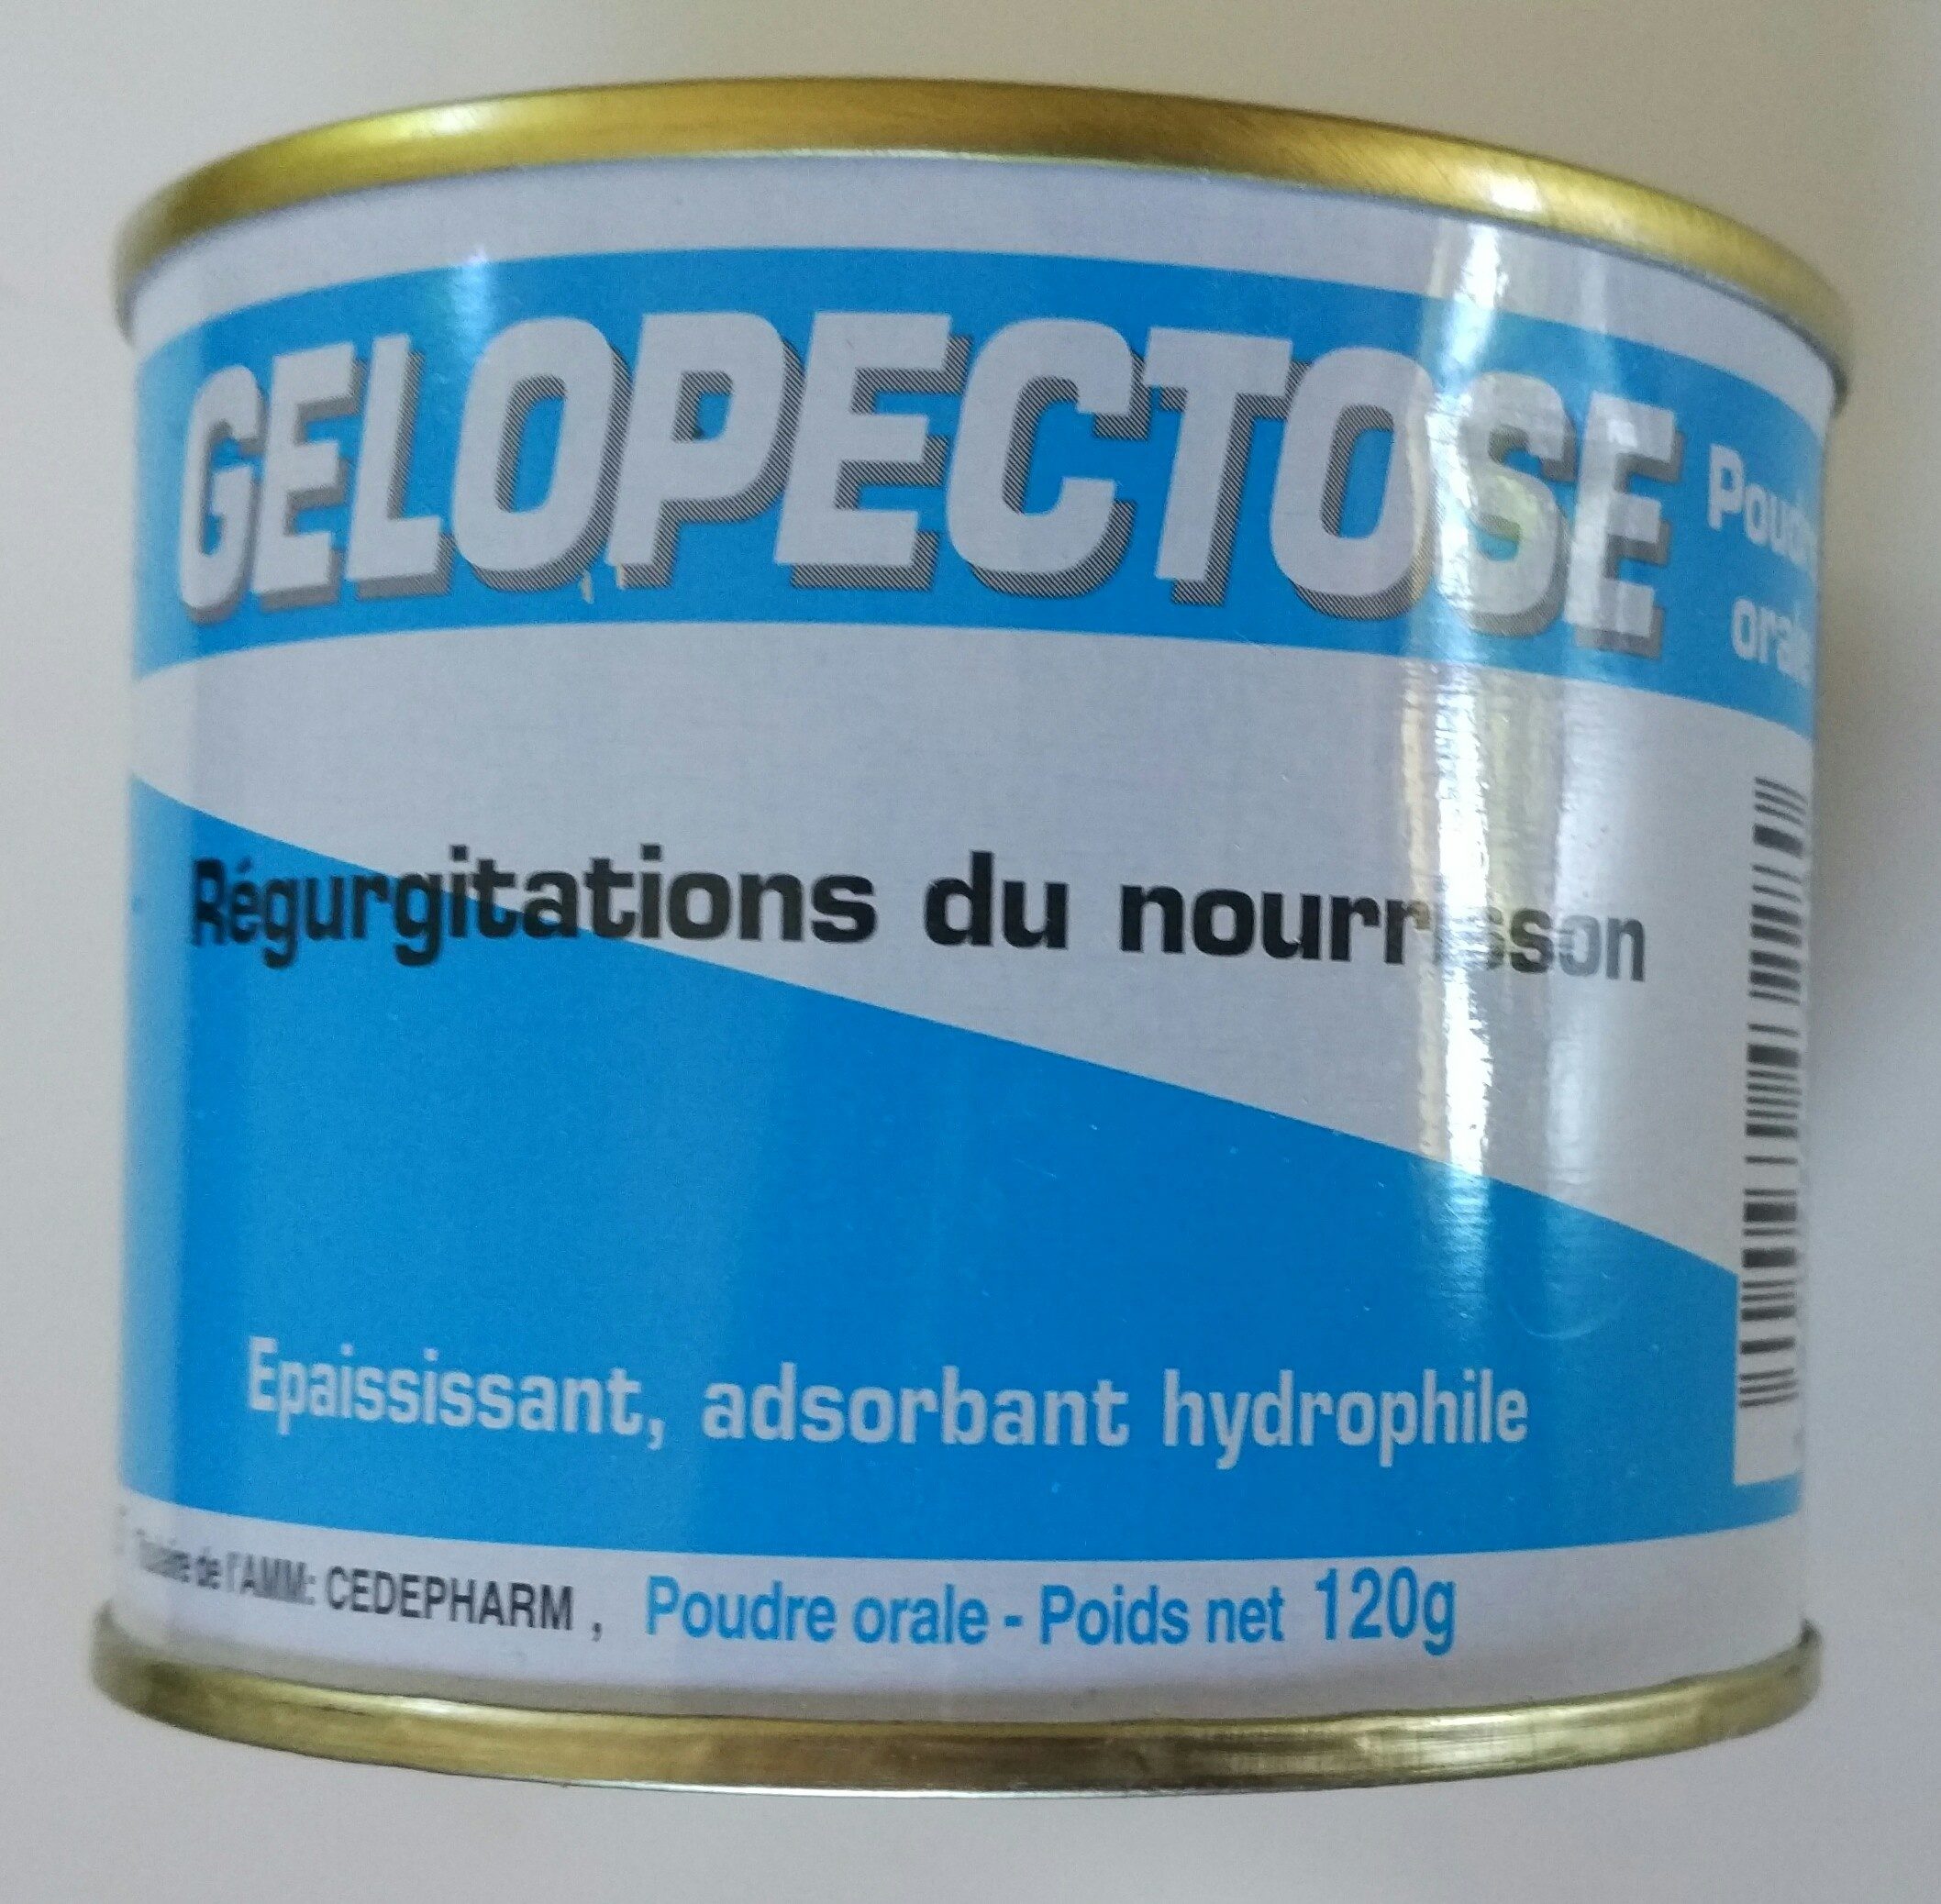 Gelopectose - Product - fr